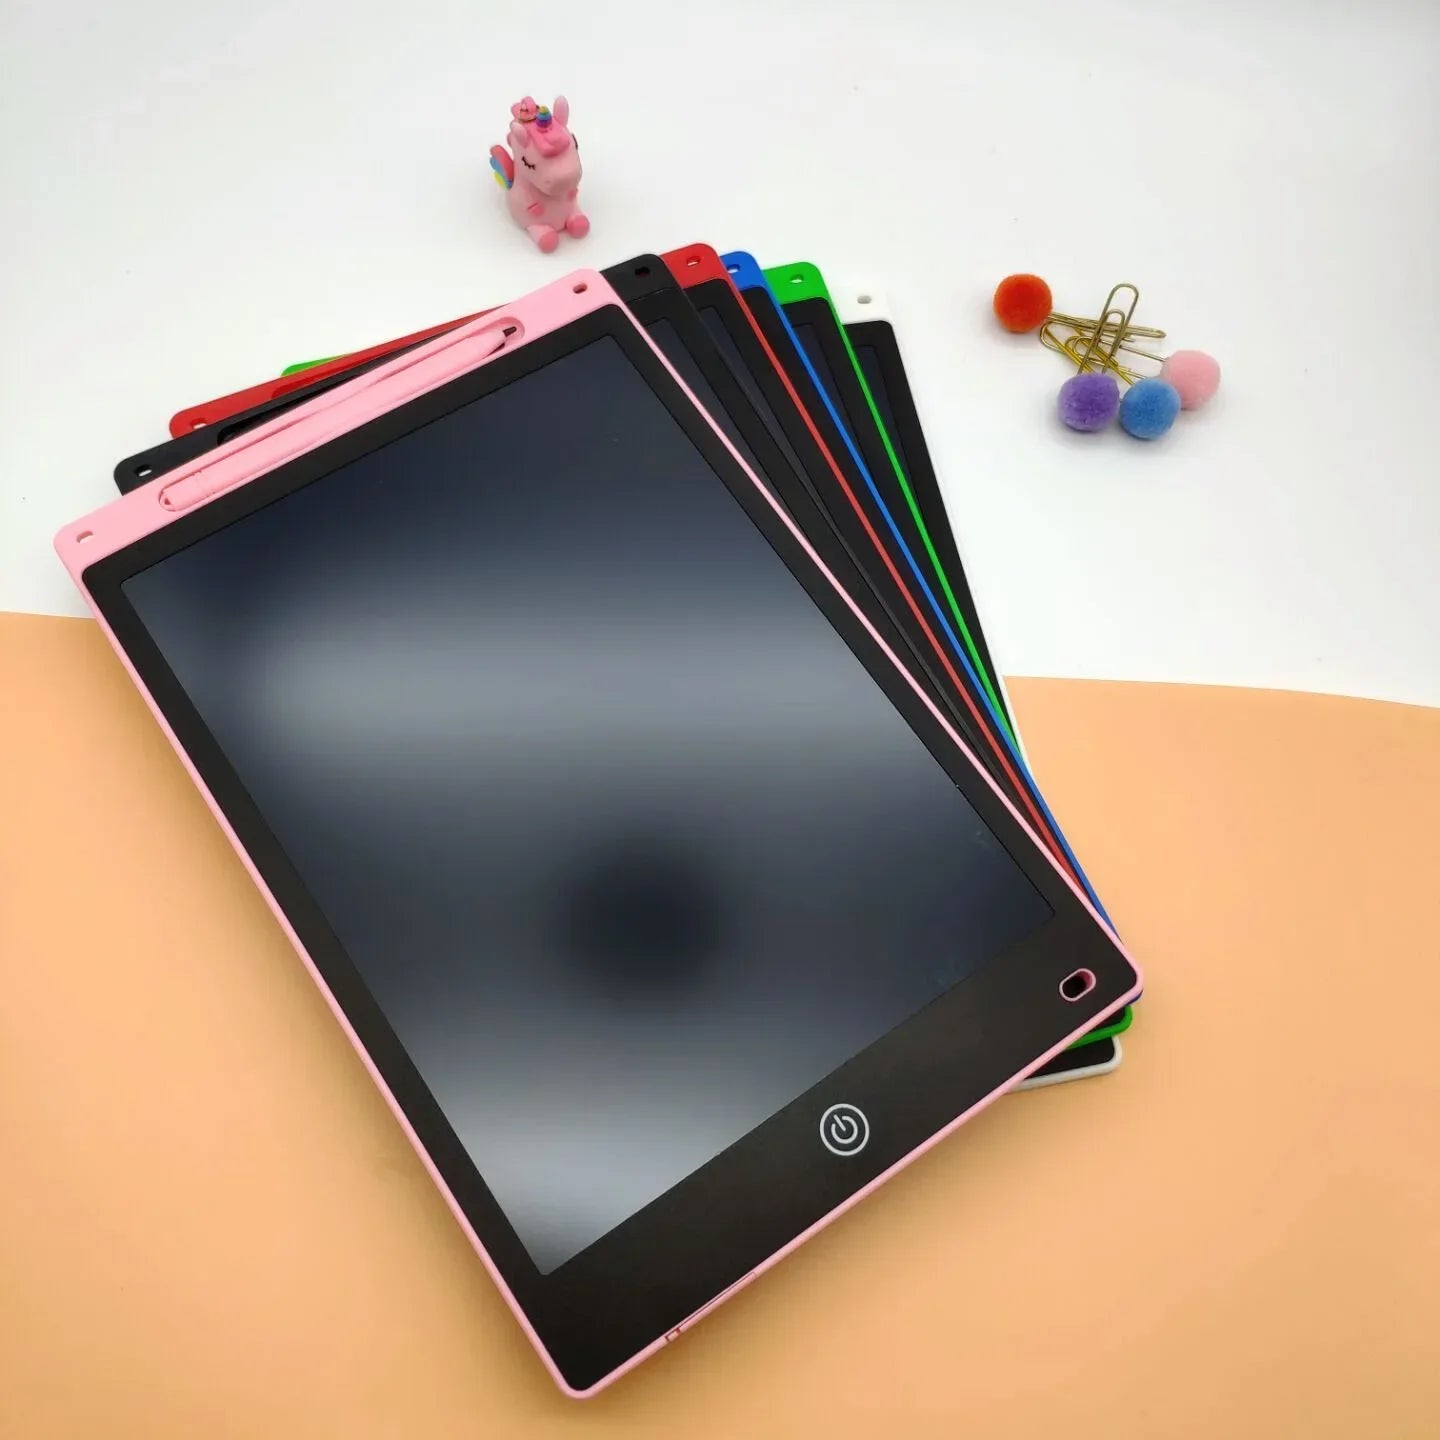 iCanvas: Electronic Drawing Tablet